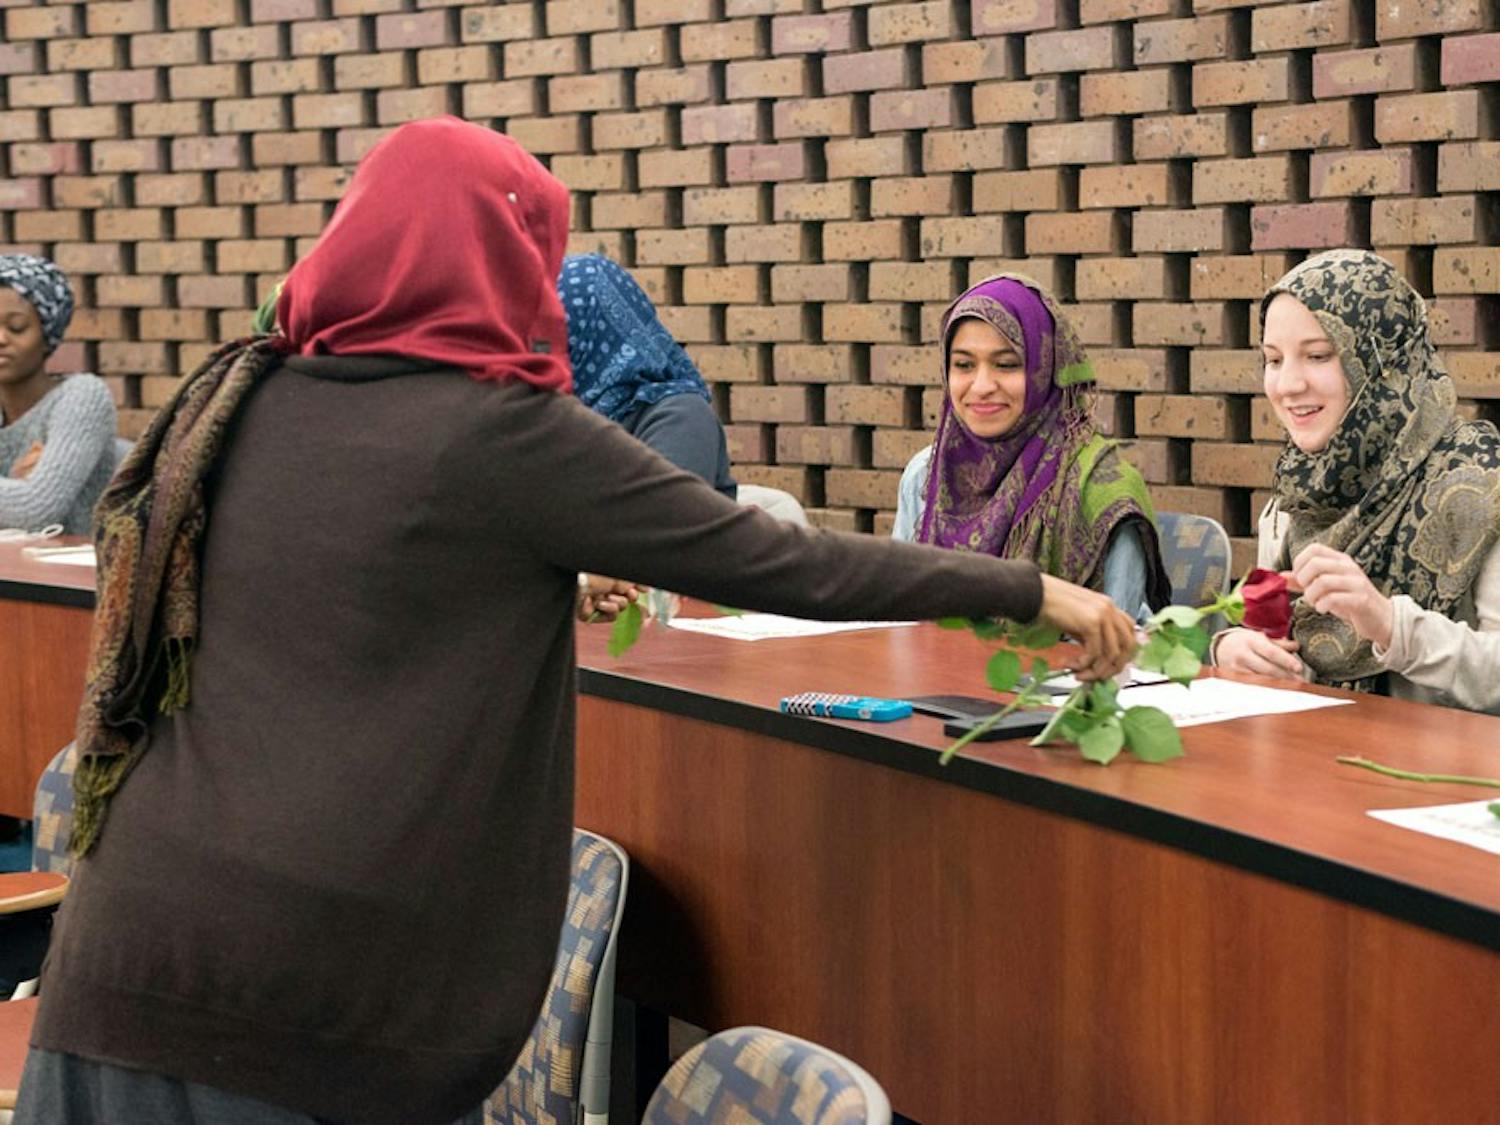 The Muslim Women's Council distributed roses to the participants in their "Cover a Mile in Her Scarf" event at the discussion panel Friday evening.